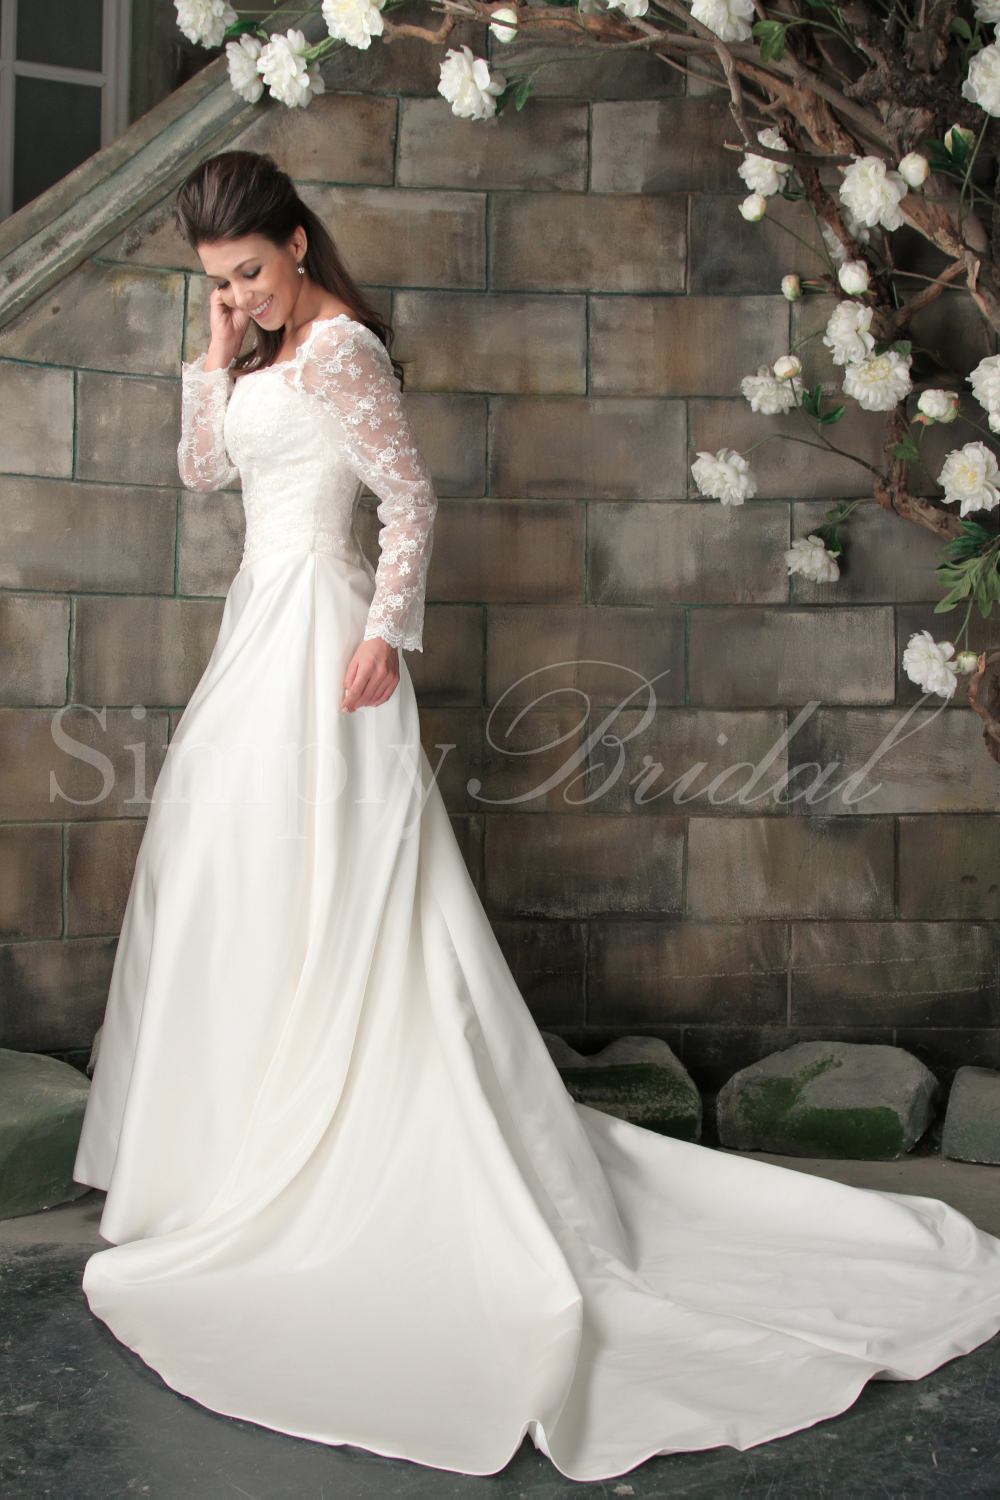 2013 wedding dress trends dress trimmed with lace long sleeves guest post by lavimage montreal